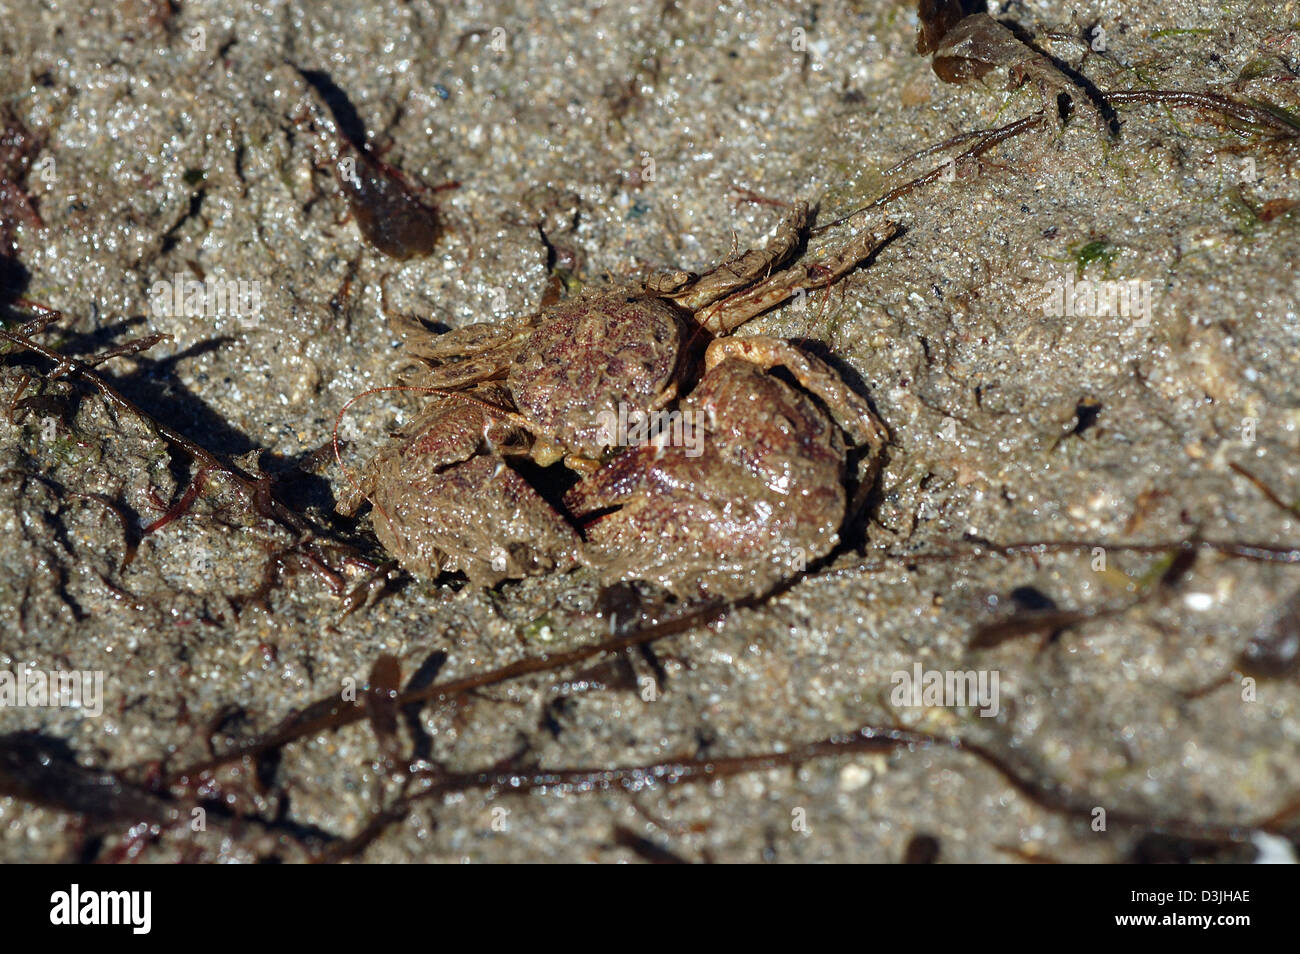 Broad-clawed porcelain crab (Porcellana platycheles: Porcellanidae) on the lower shore UK Stock Photo